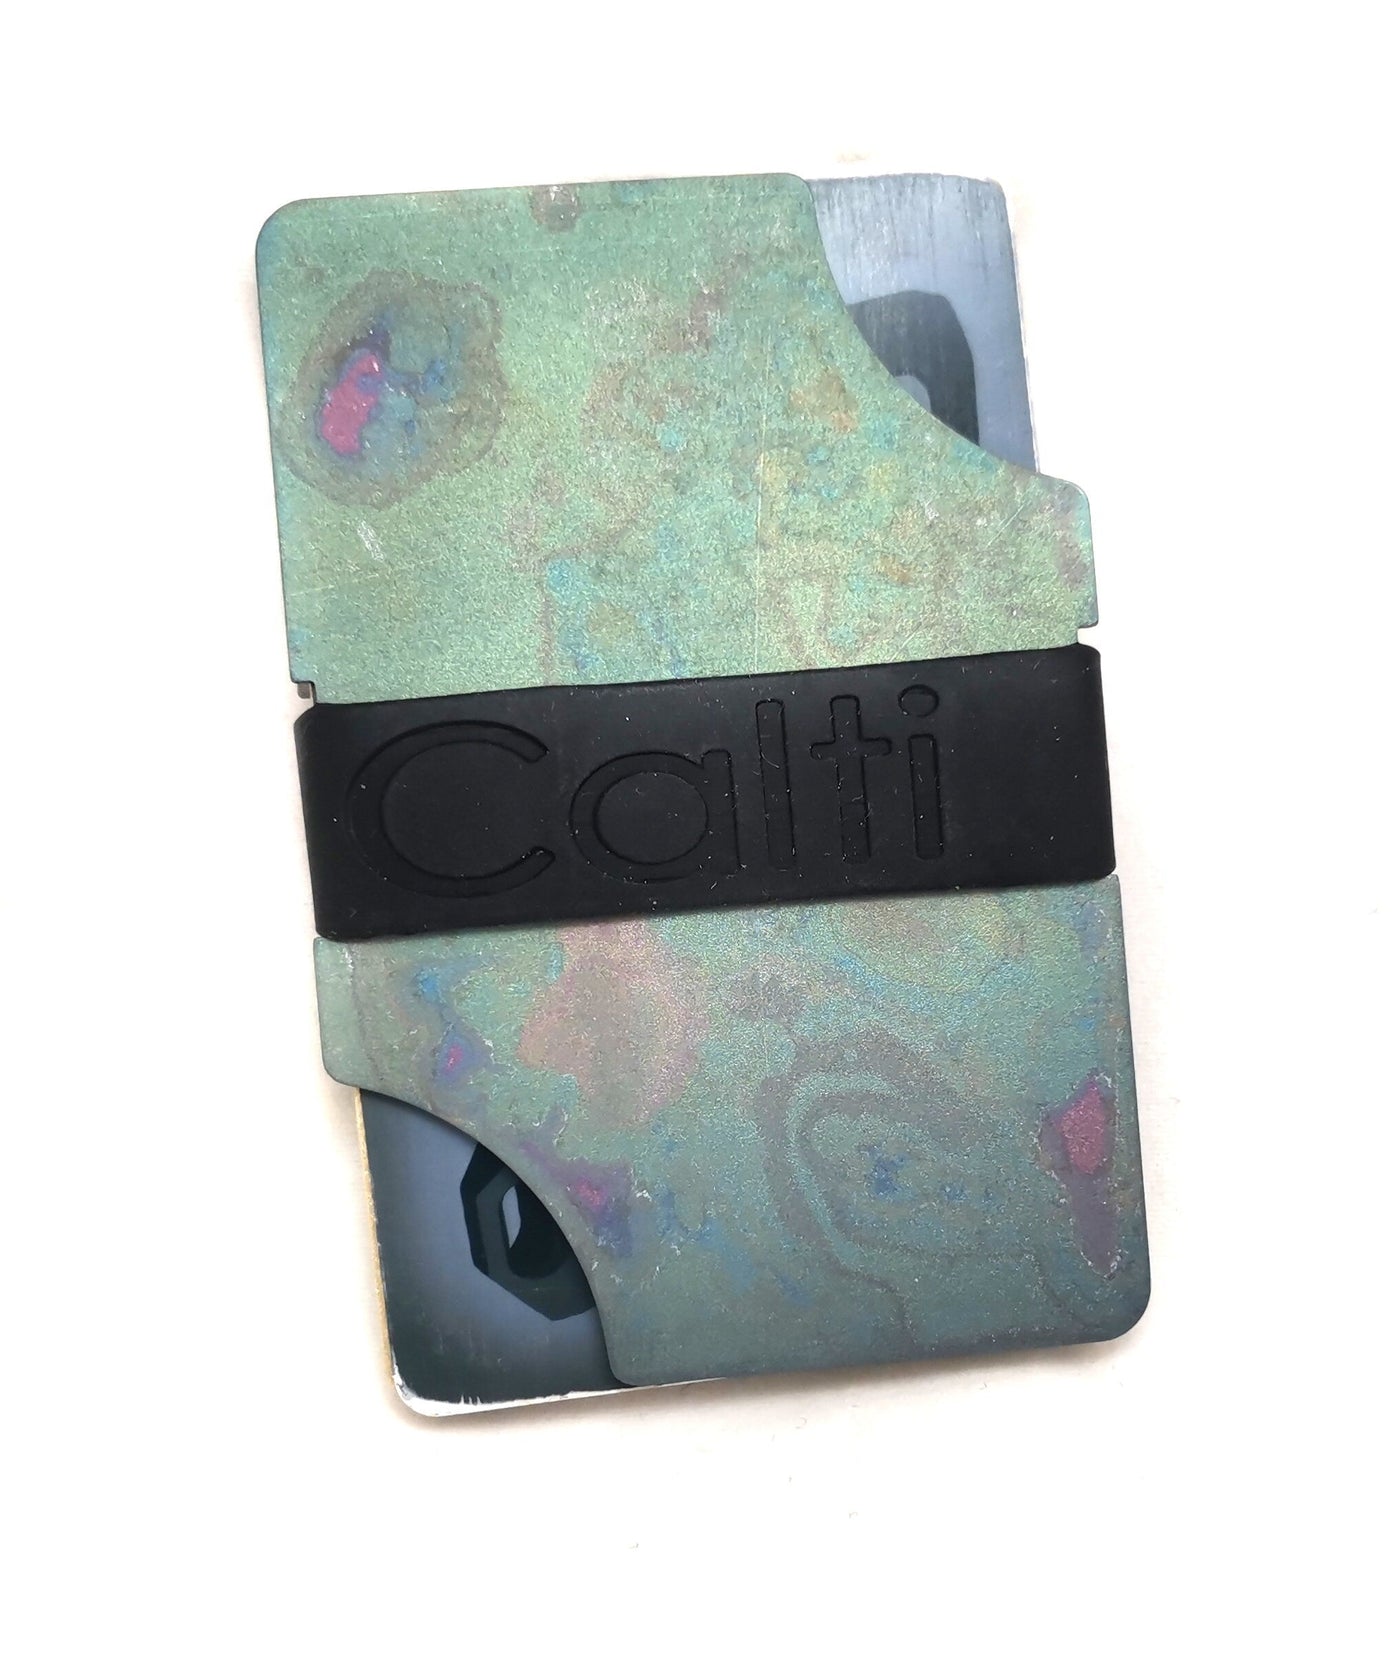 Titanium slim wallet for everyday carry